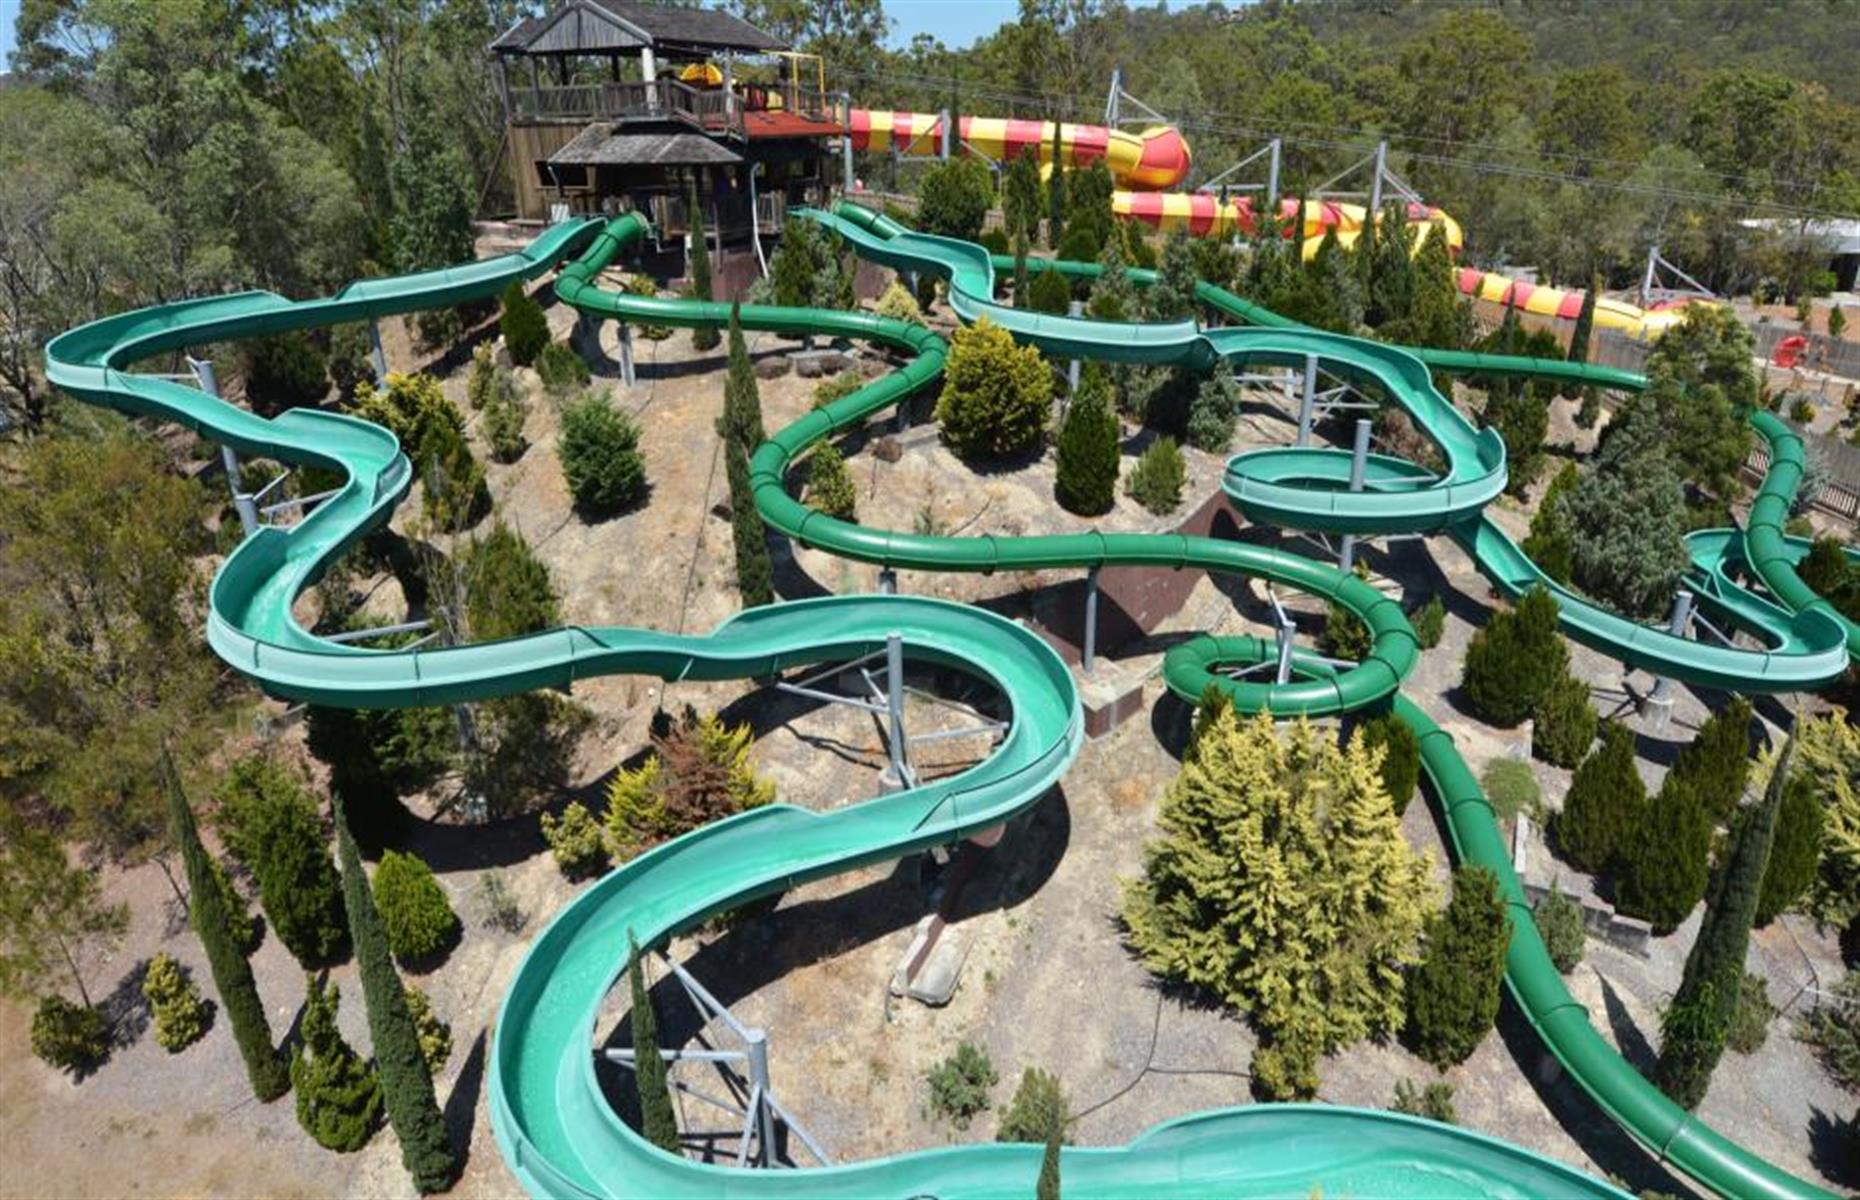 <p>It's no surprise that balmy Queensland has one of <a href="https://wetnwild.com.au">Australia's best water parks</a>. Head straight to the Extreme H20 Zone if you're after a challenge. The exhilarating Blackhole takes riders on a spiral down into a pitch black tube slide. Or dare to take on the aptly named Kamikaze and plunge down a near vertical 36-foot (11m) drop for a zero gravity sensation. But there's plenty of gentler rides too and lovely tropical gardens for splashing and chilling in.  </p>  <p><a href="http://www.loveexploring.com/galleries/81198/australias-brilliantly-bizarre-big-things?page=1"><strong>Have you seen Australia's brilliantly bizarre Big Things?</strong></a></p>